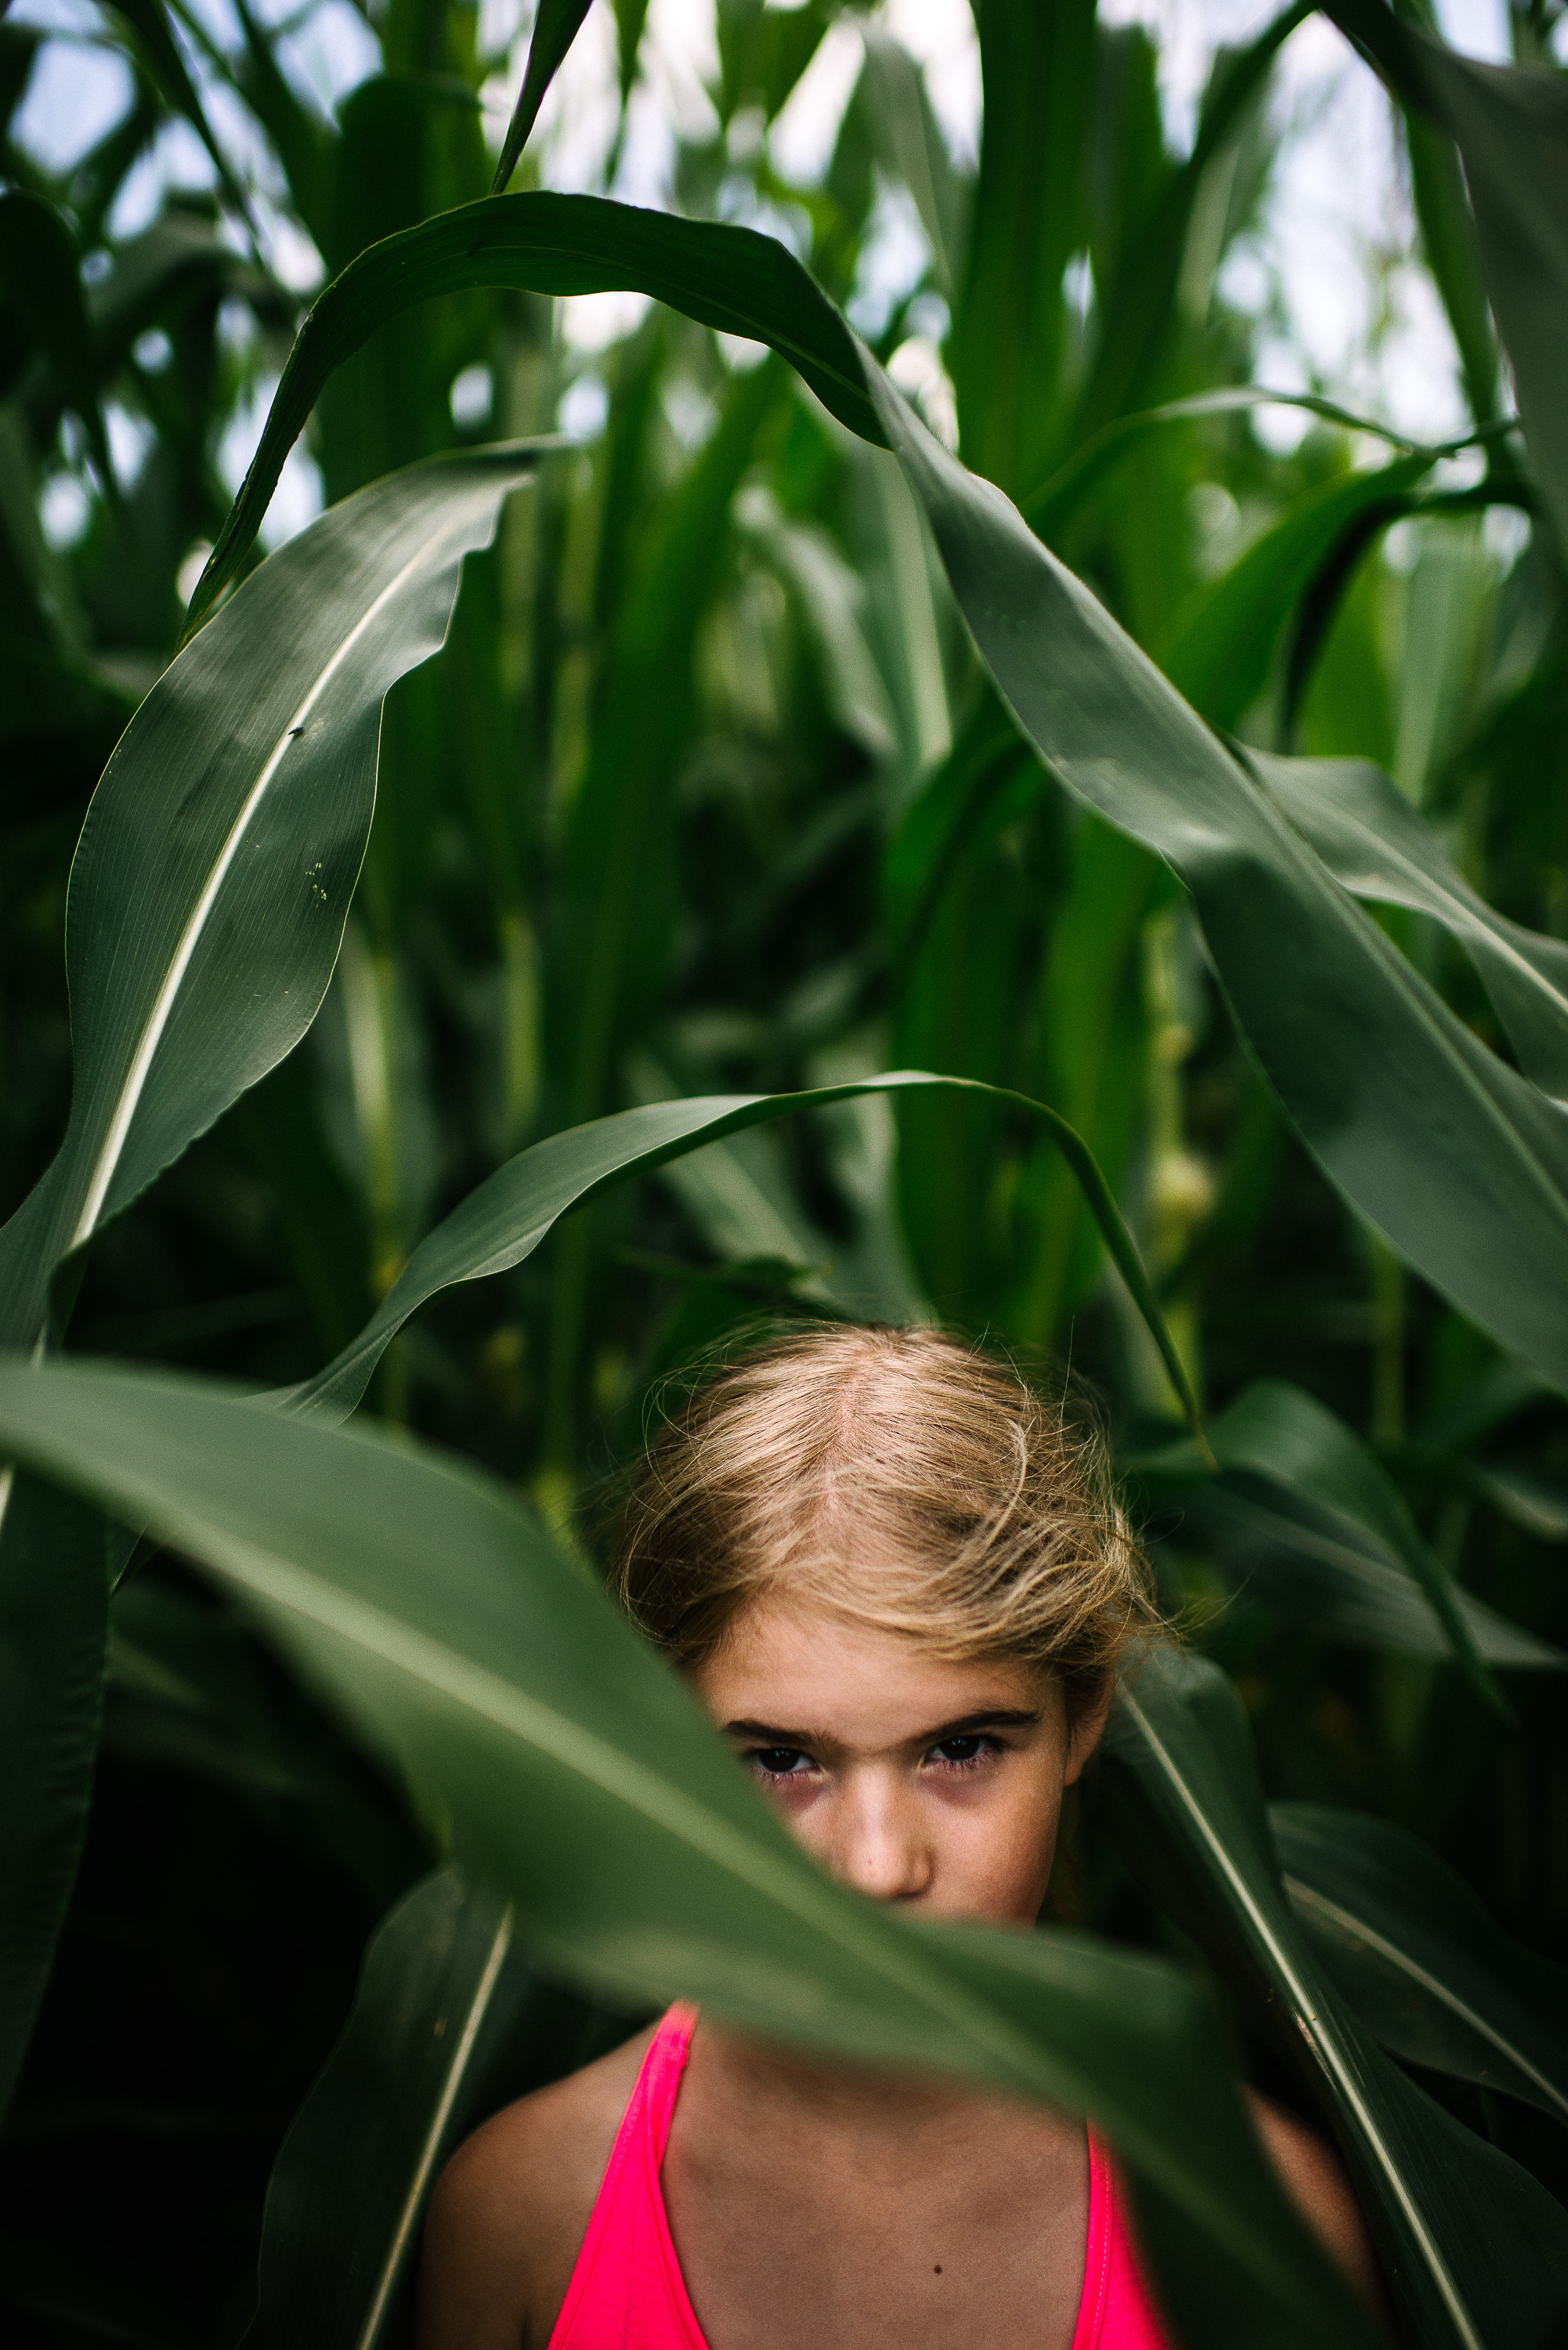 mysterious, in the corn